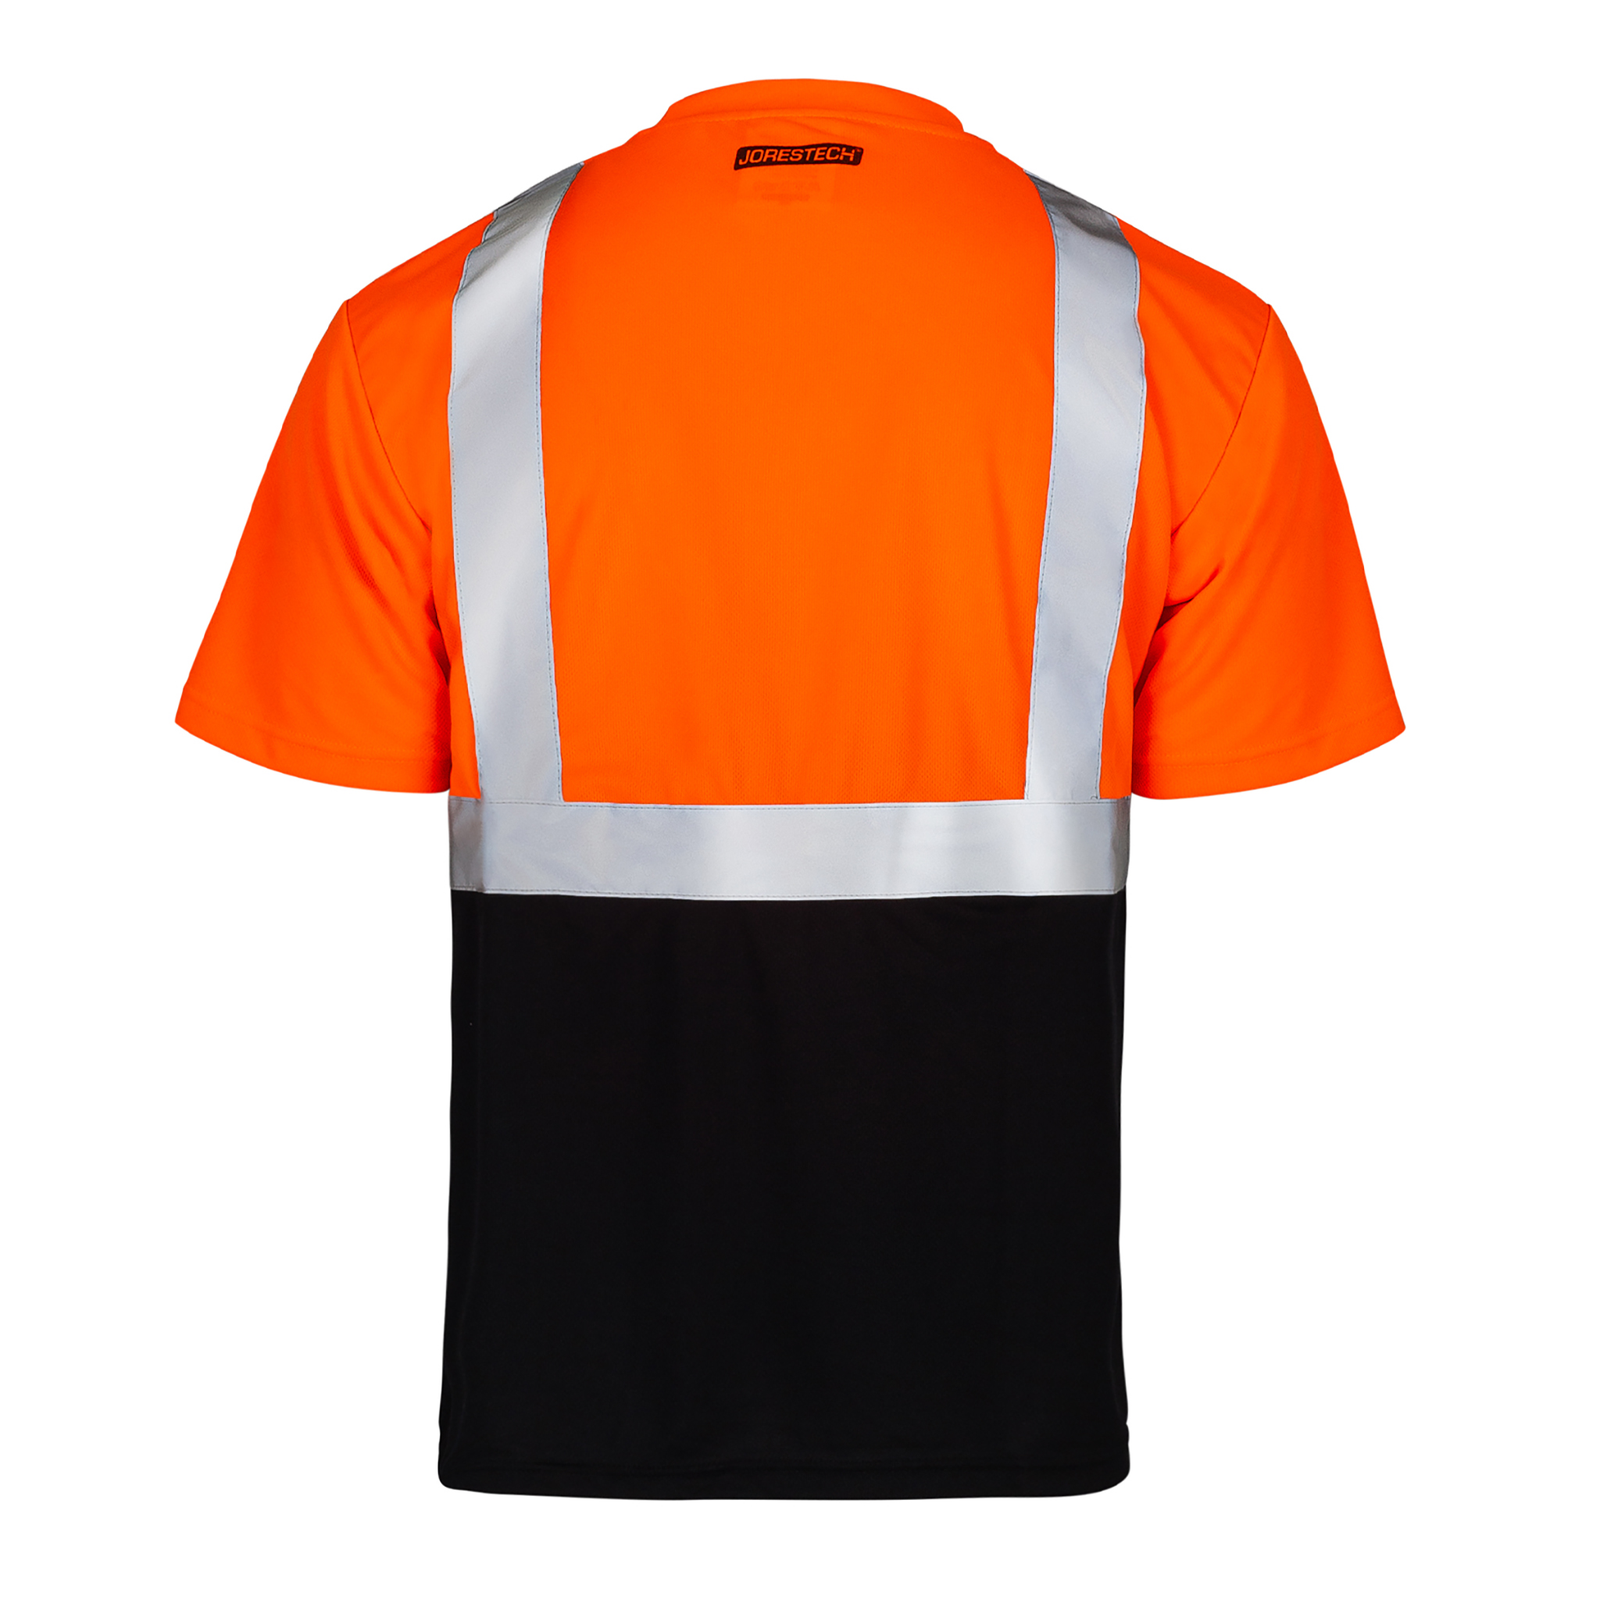 Back of the orange and black JORESTECH safety shirt with reflective strips 